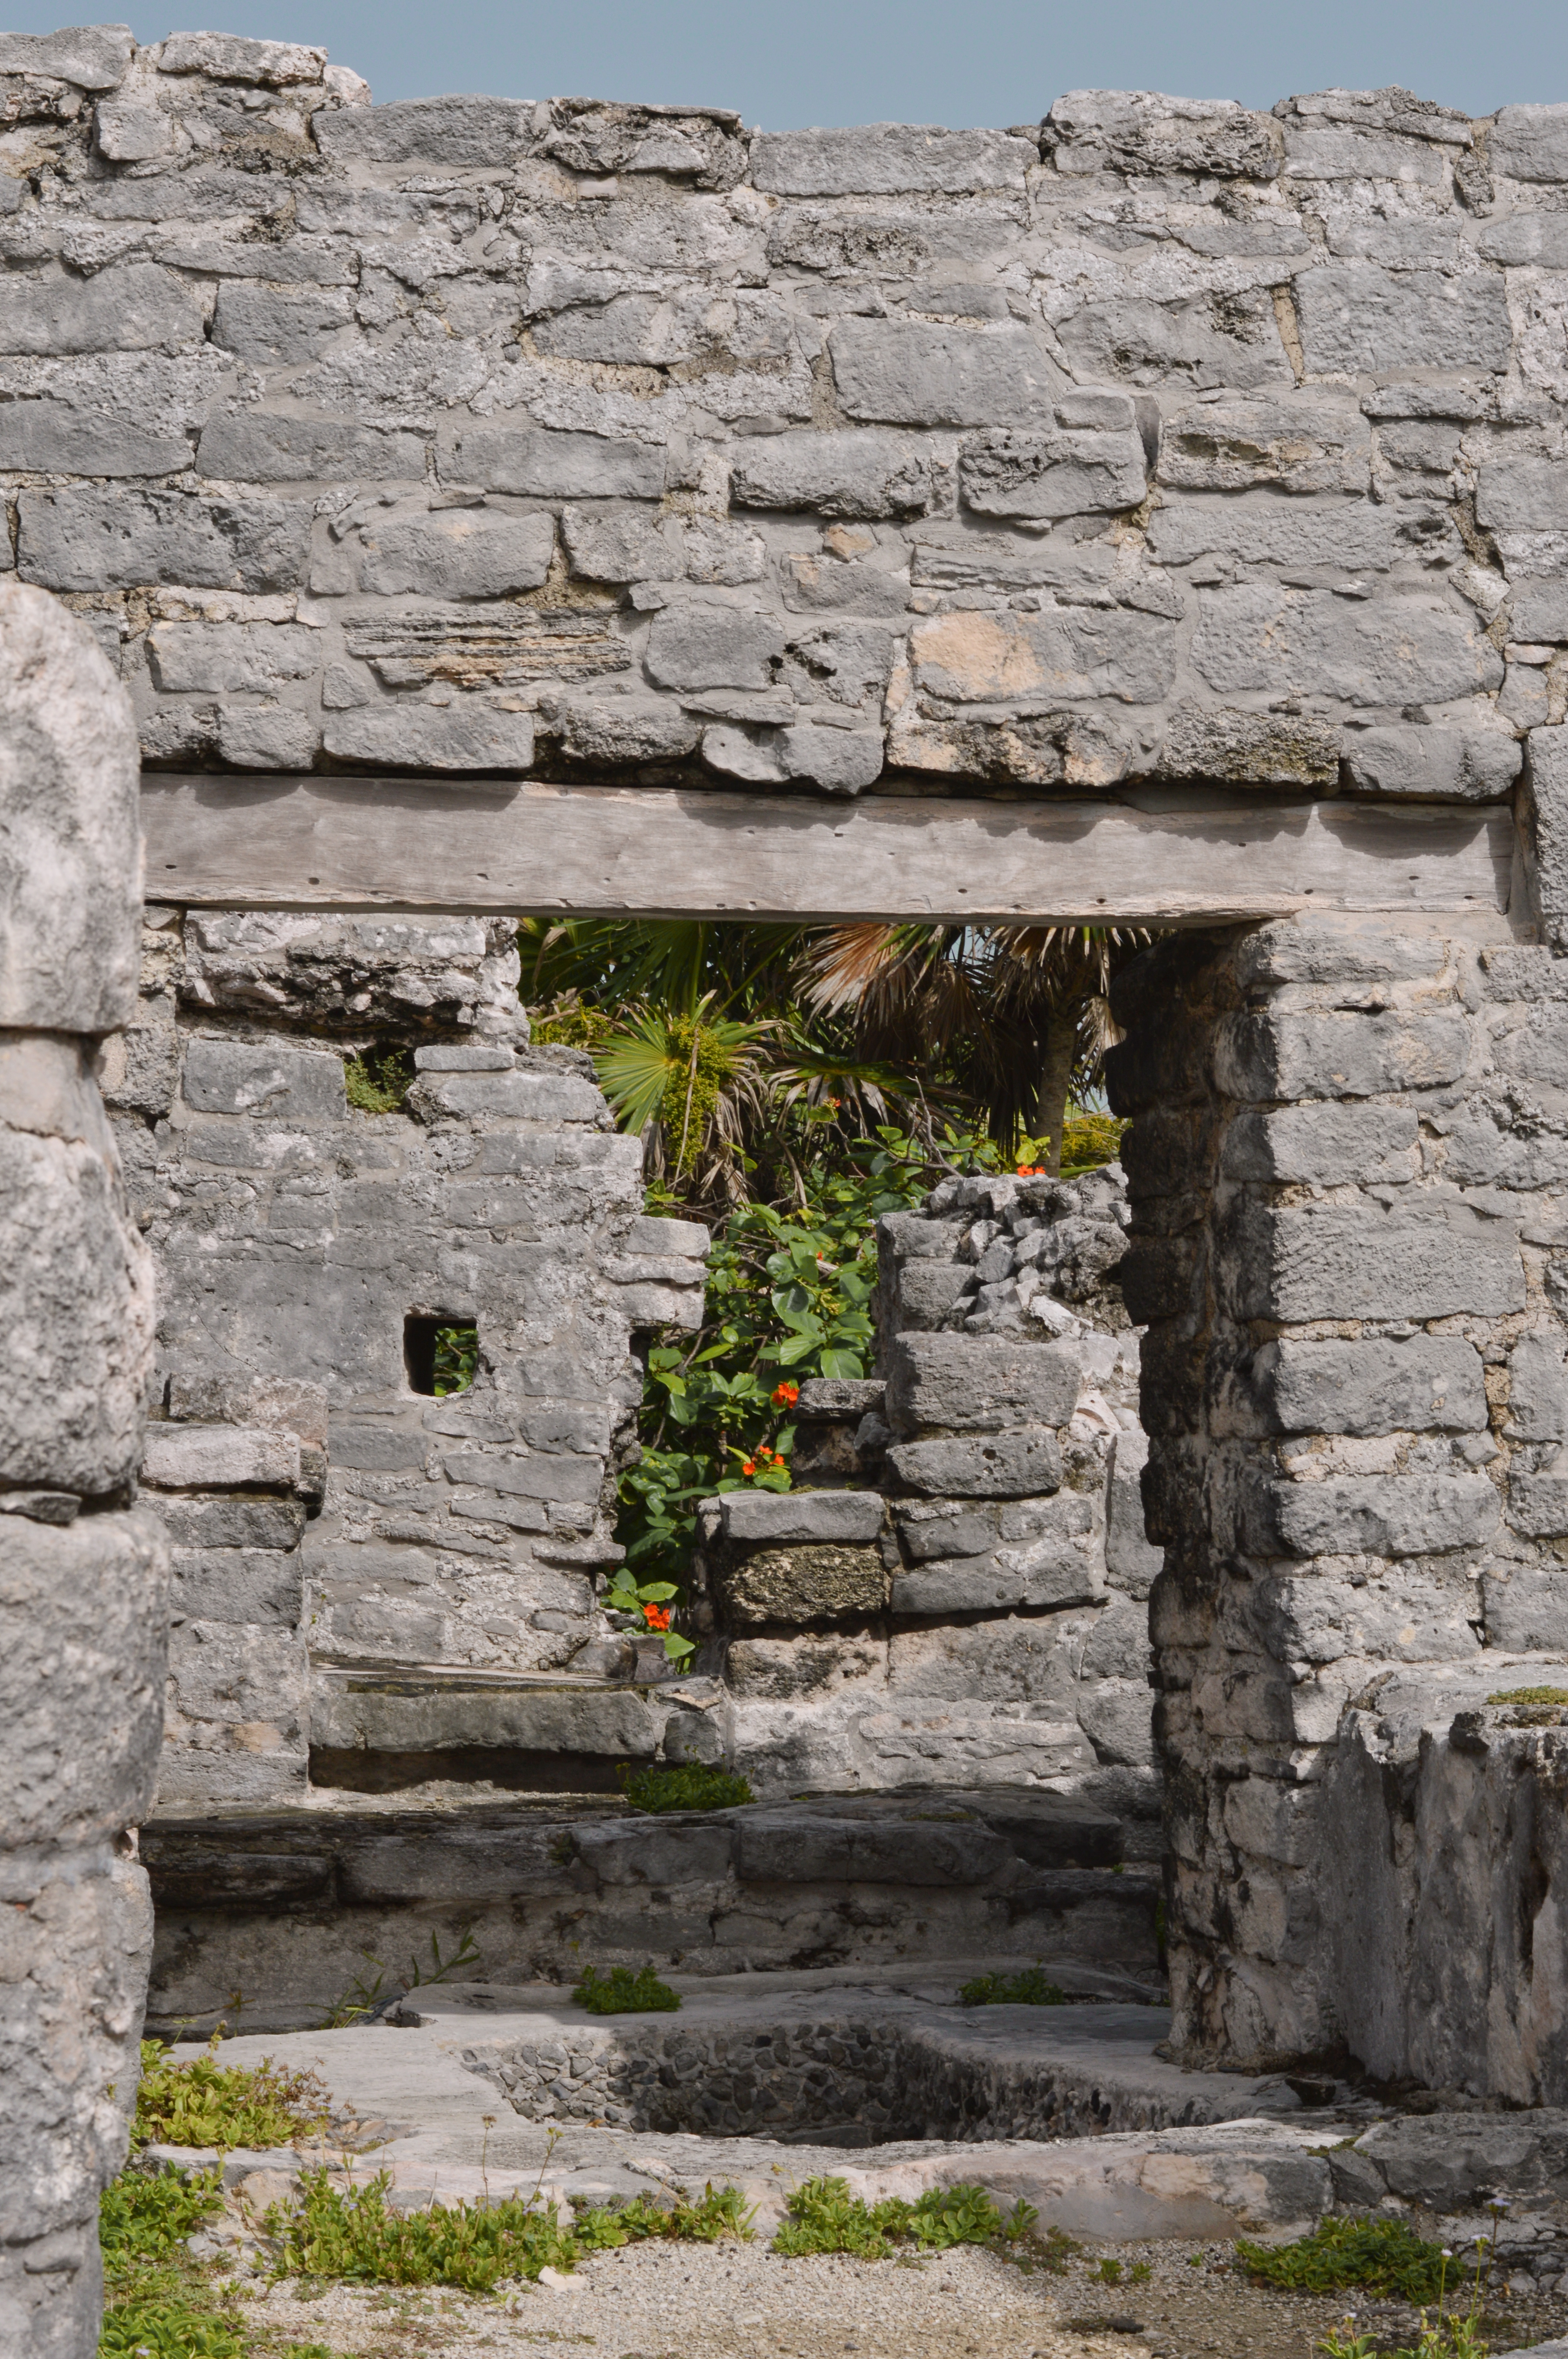 Details of the Tulum Ruins